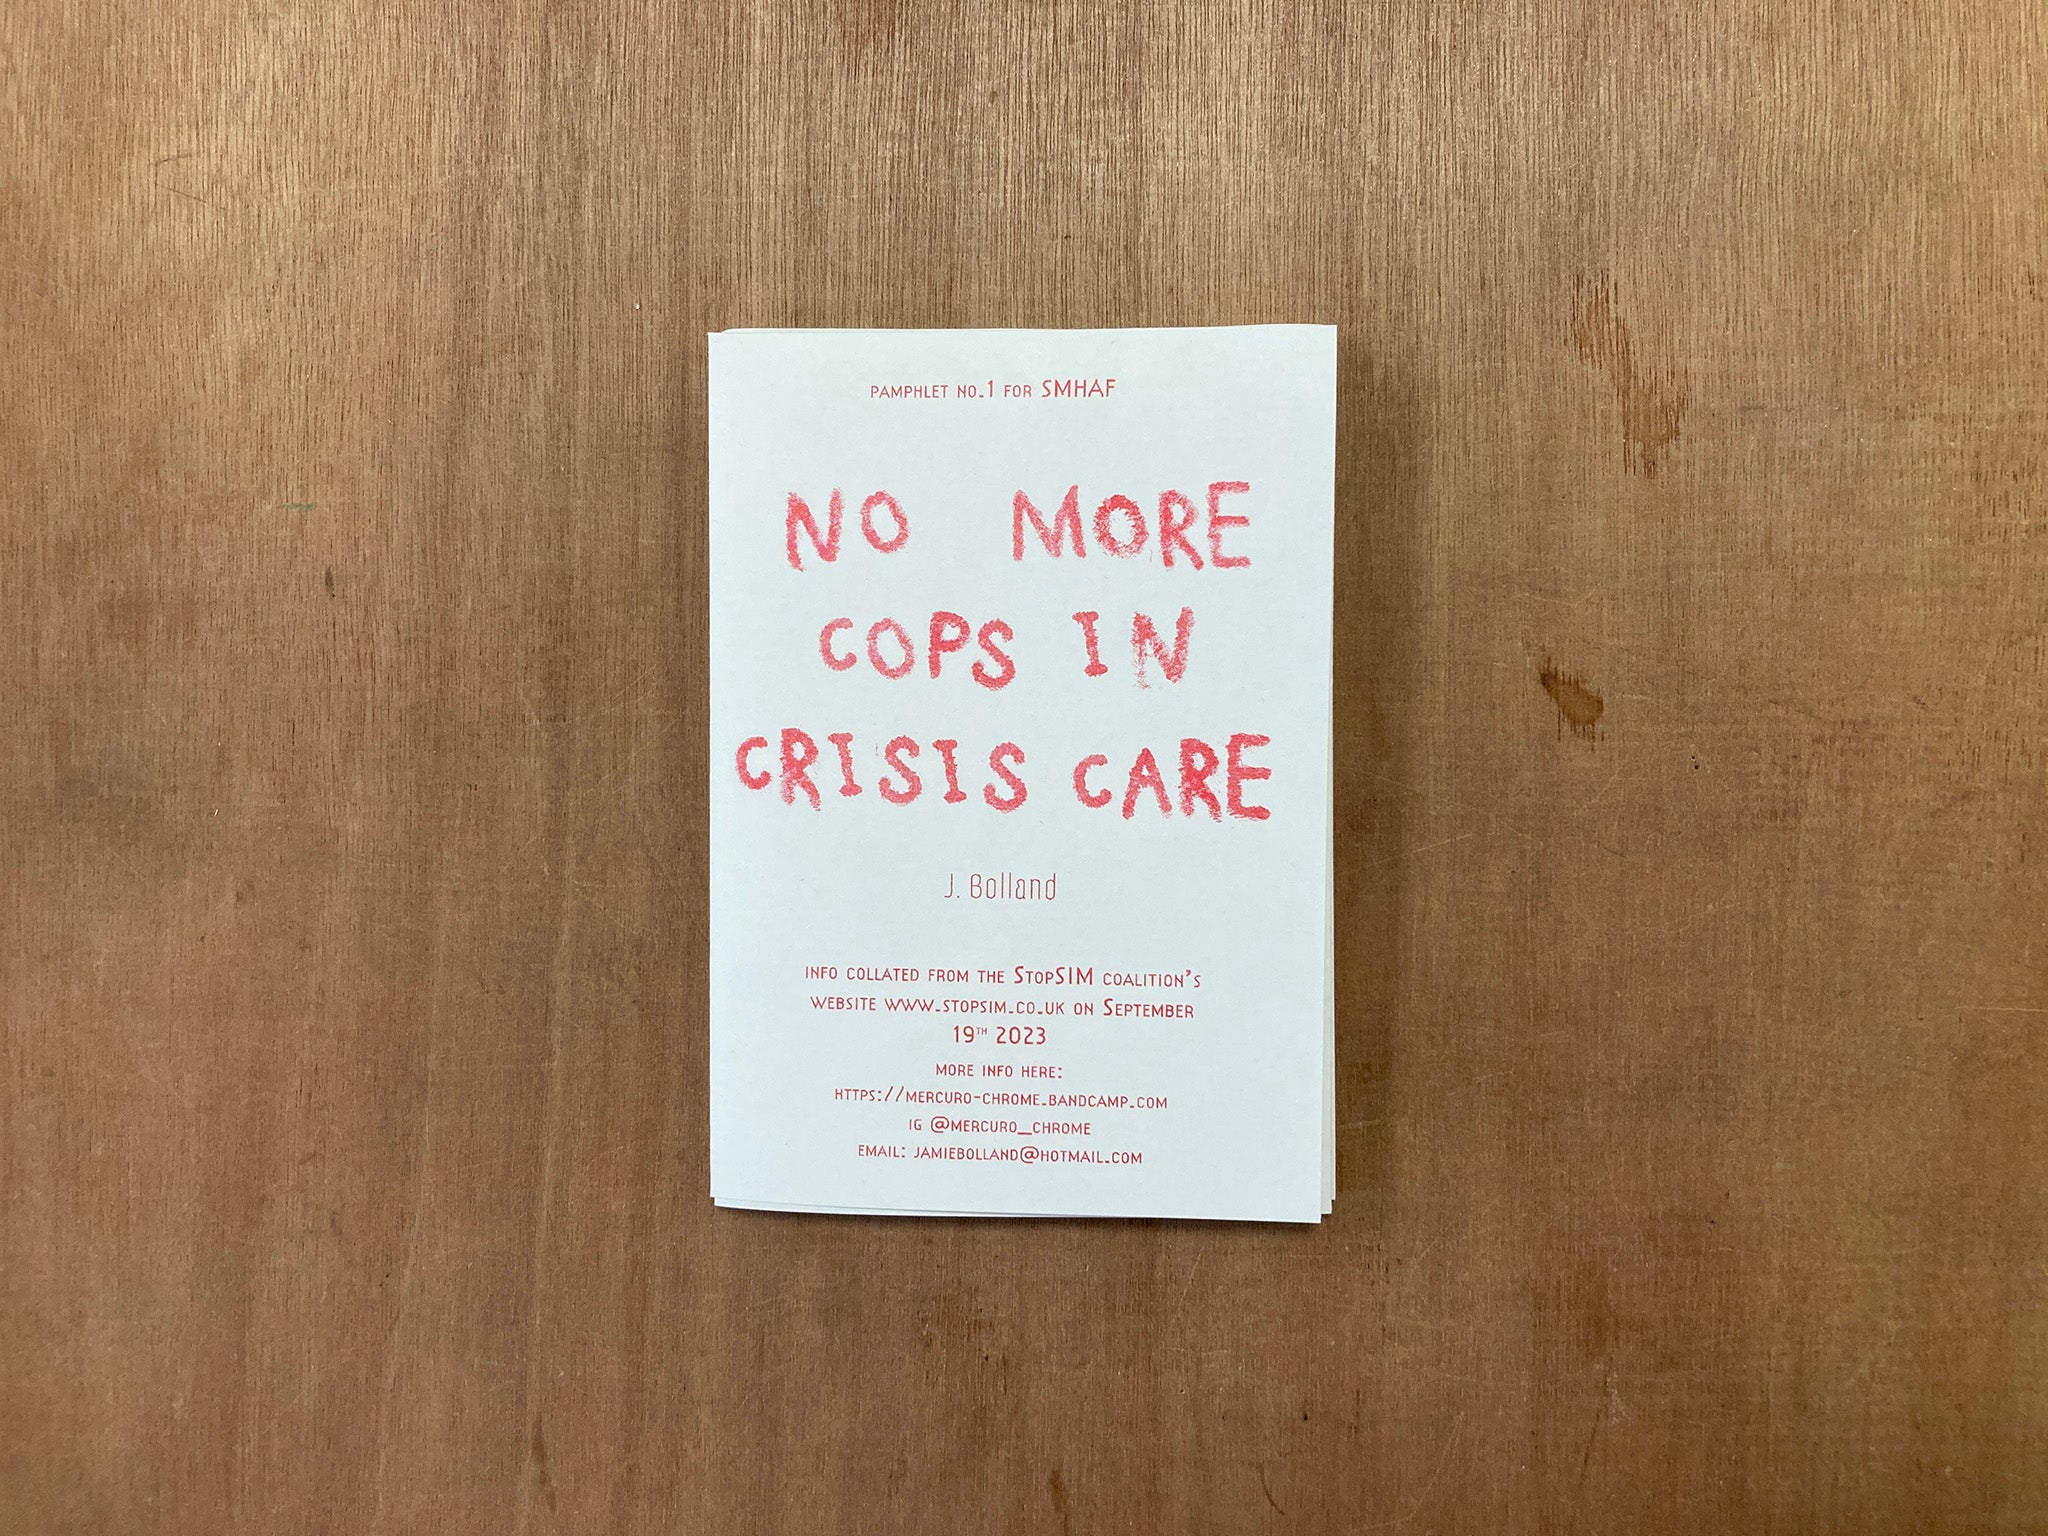 NO MORE COPS IN CRISIS CARE by J. Bolland